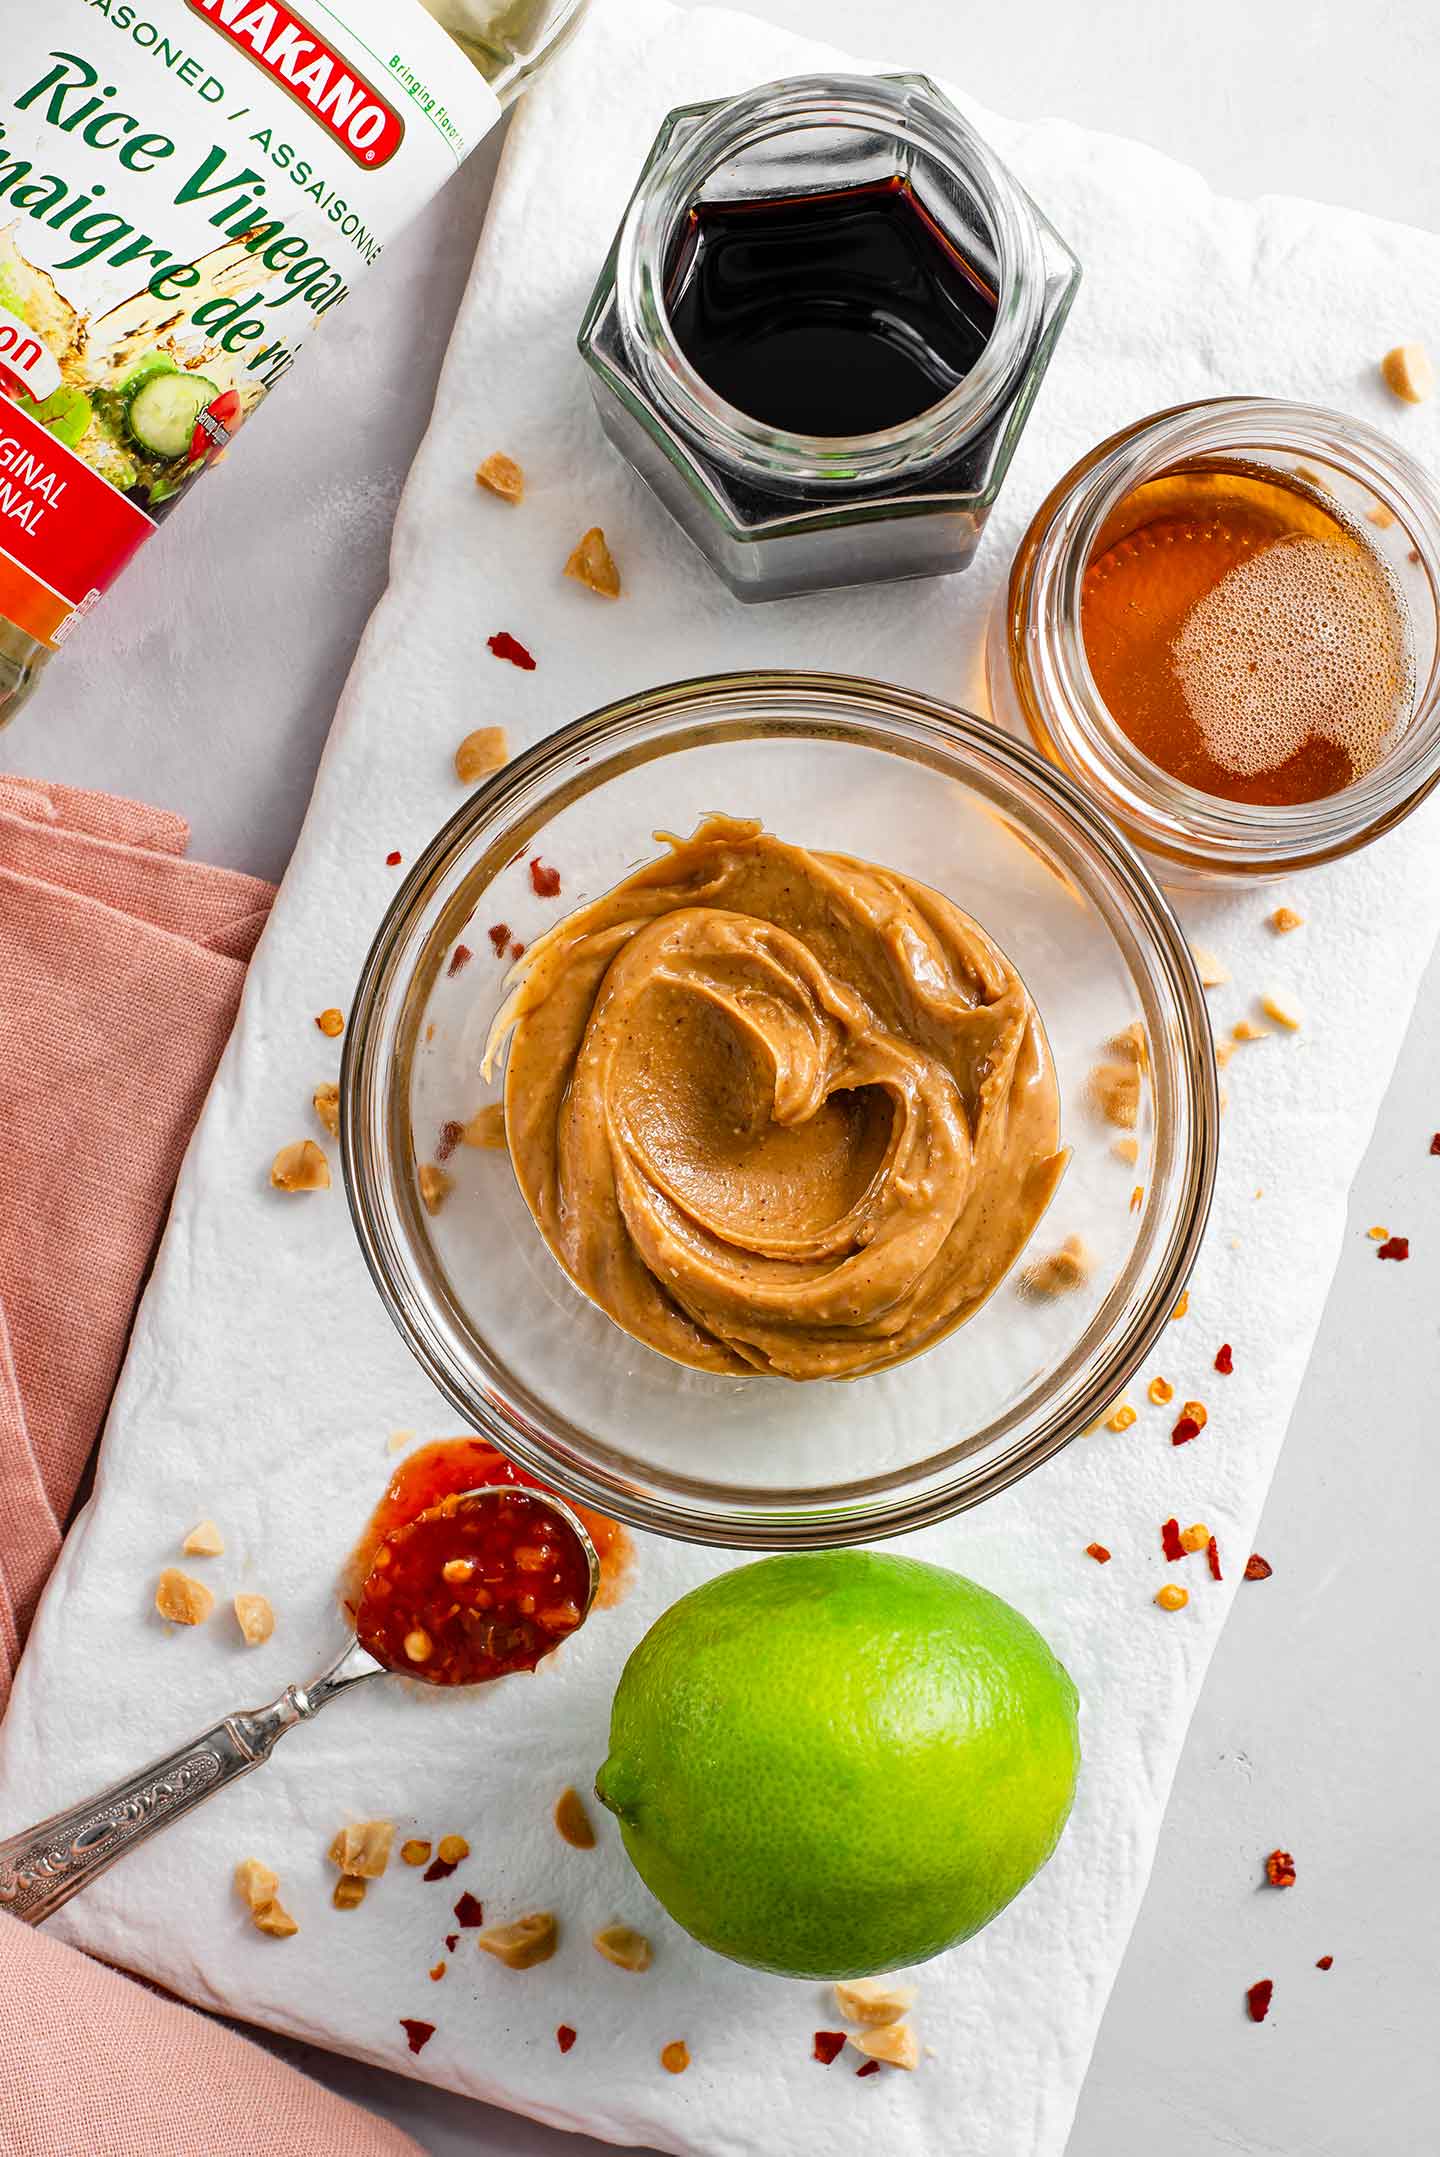 20 Minute Peanut Sauce To The Rescue